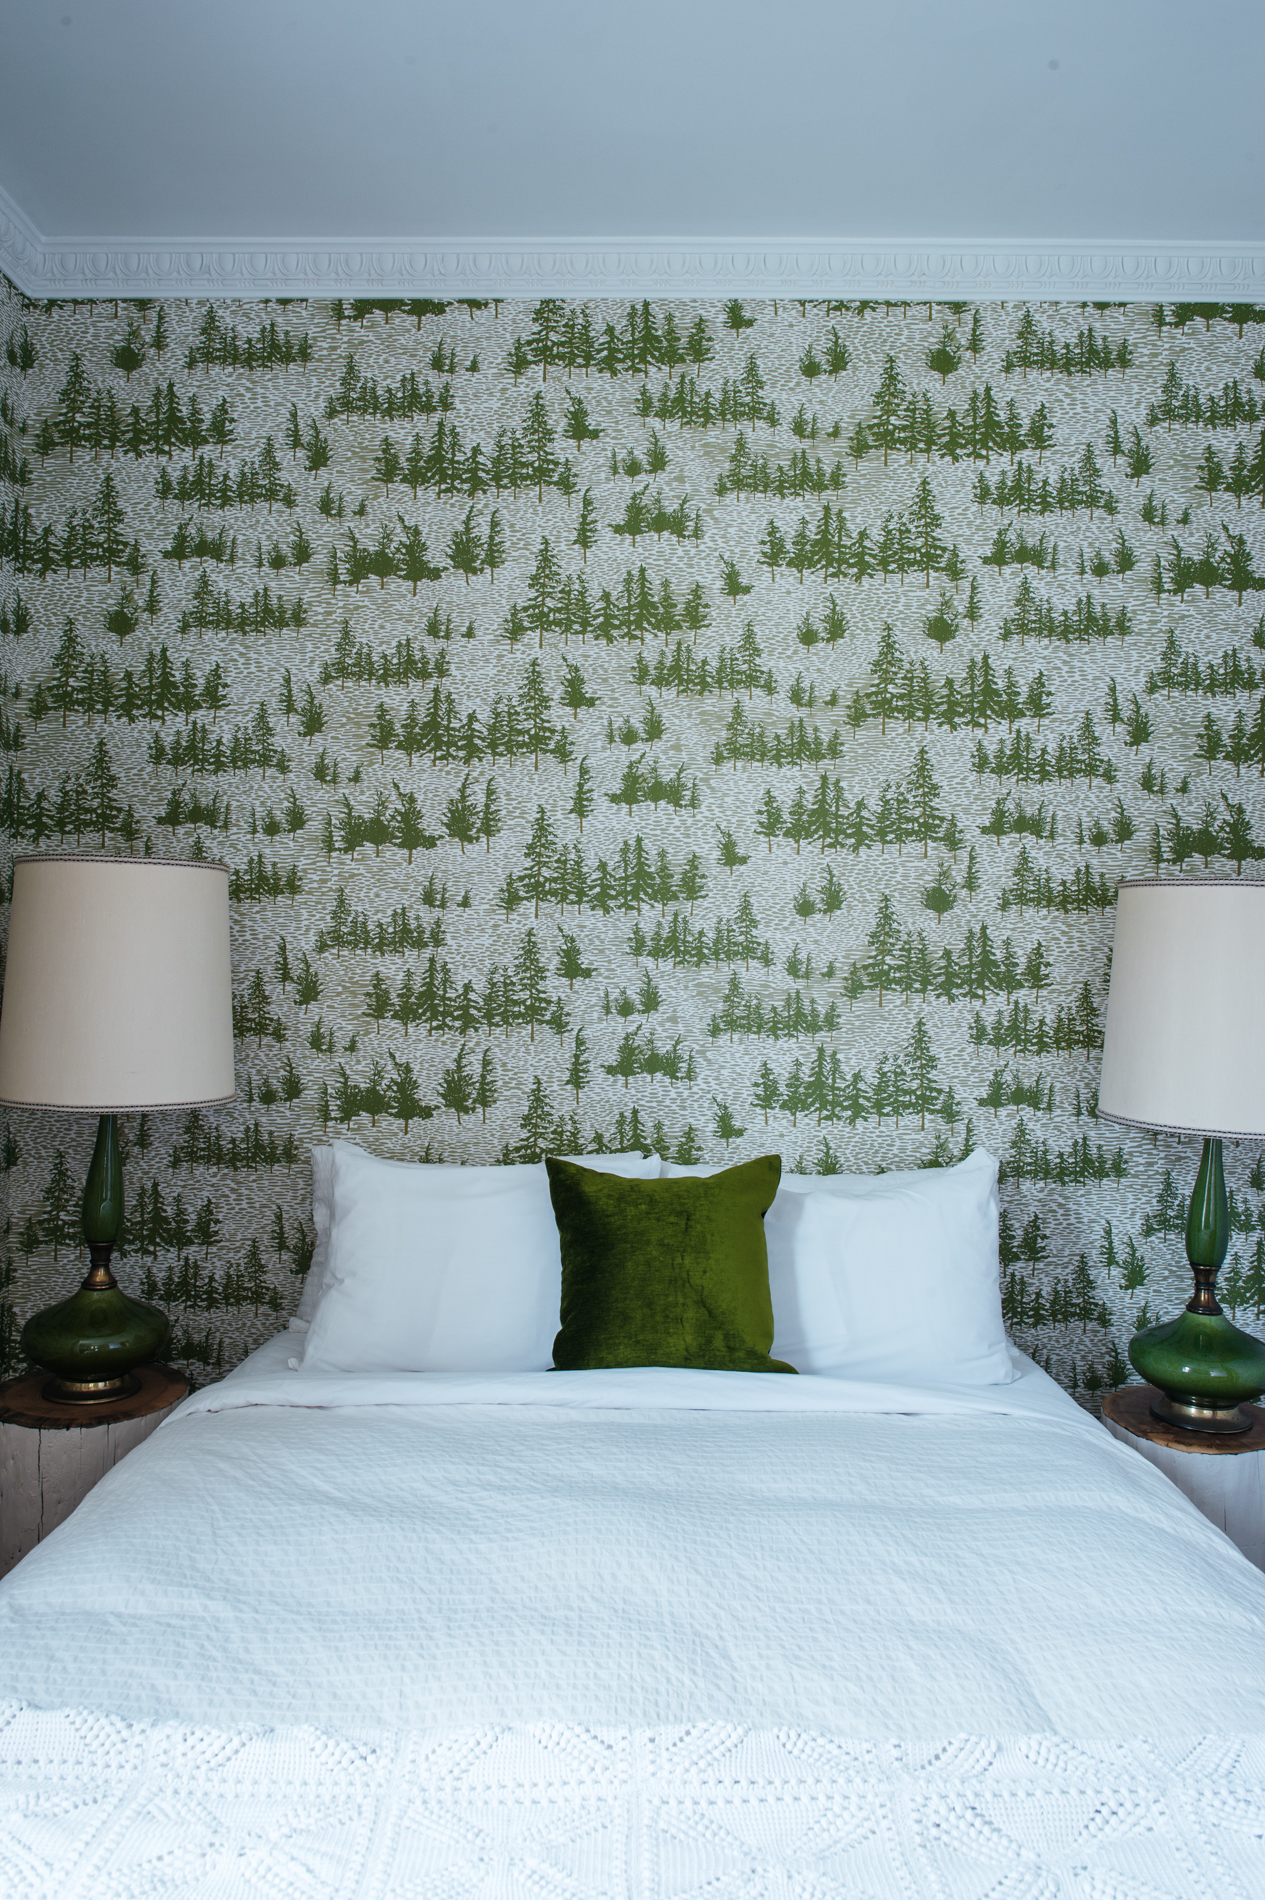 Kate Golding Chcukery Hill wallpaper // Modern wallcoverings and interior decor.